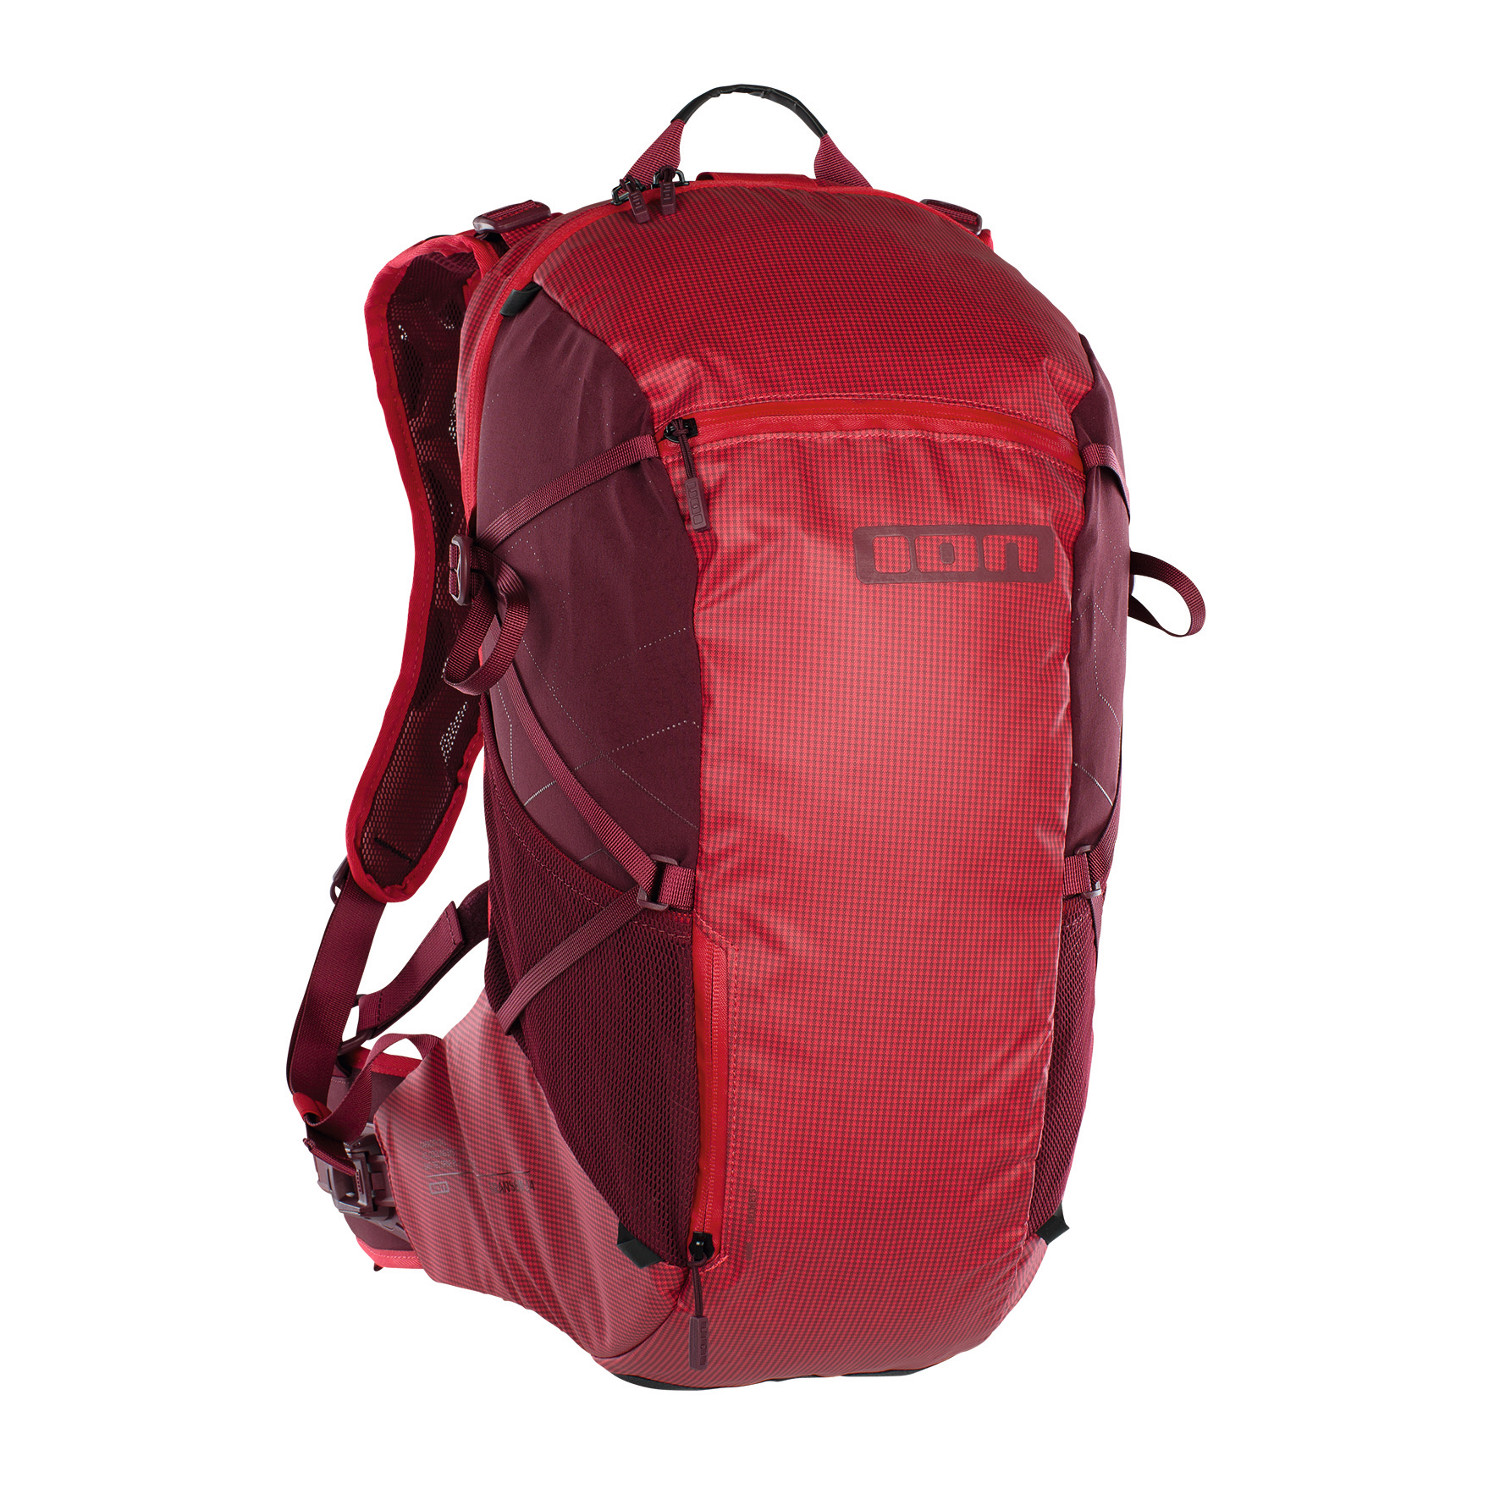 ION Backpack with Hydration System Compartment Transom 24 Blazing Red, 24 L